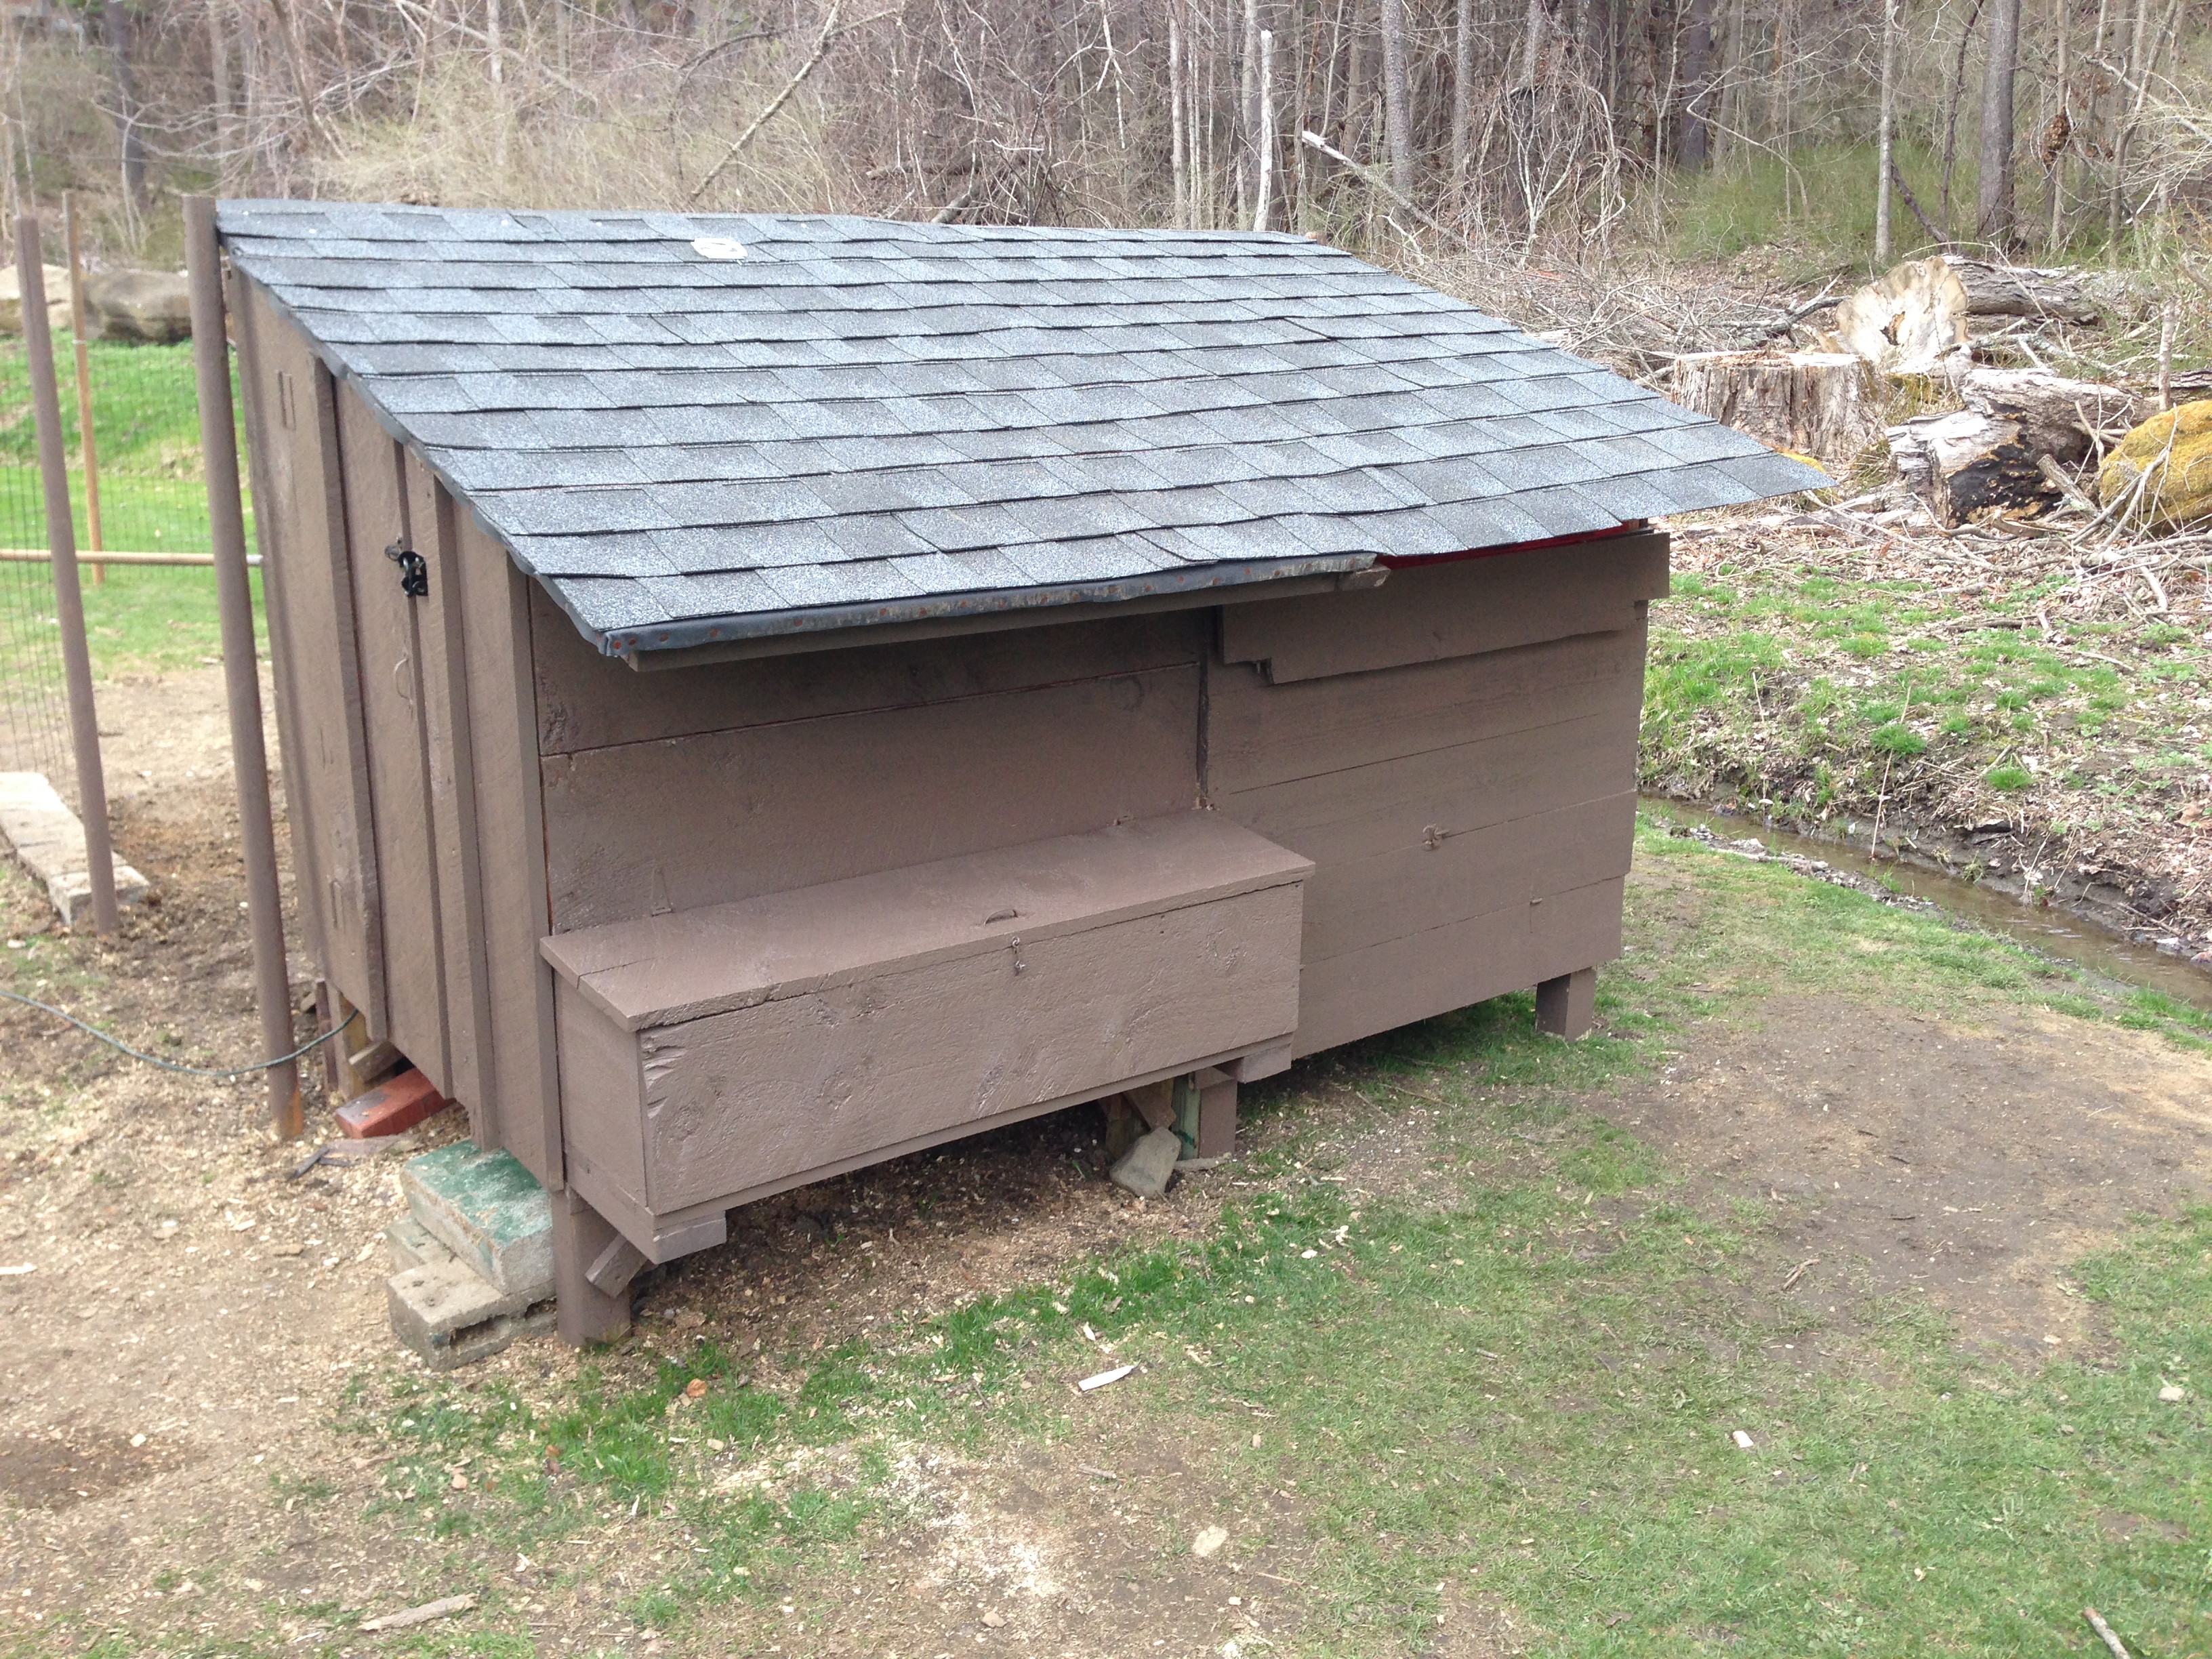 We added a new roof to both the existing coop and the addition.  The materials were only $30 at HD.  It was my first time roofing but I think it came out pretty good. It also makes it look like the addition was part of the initial design.